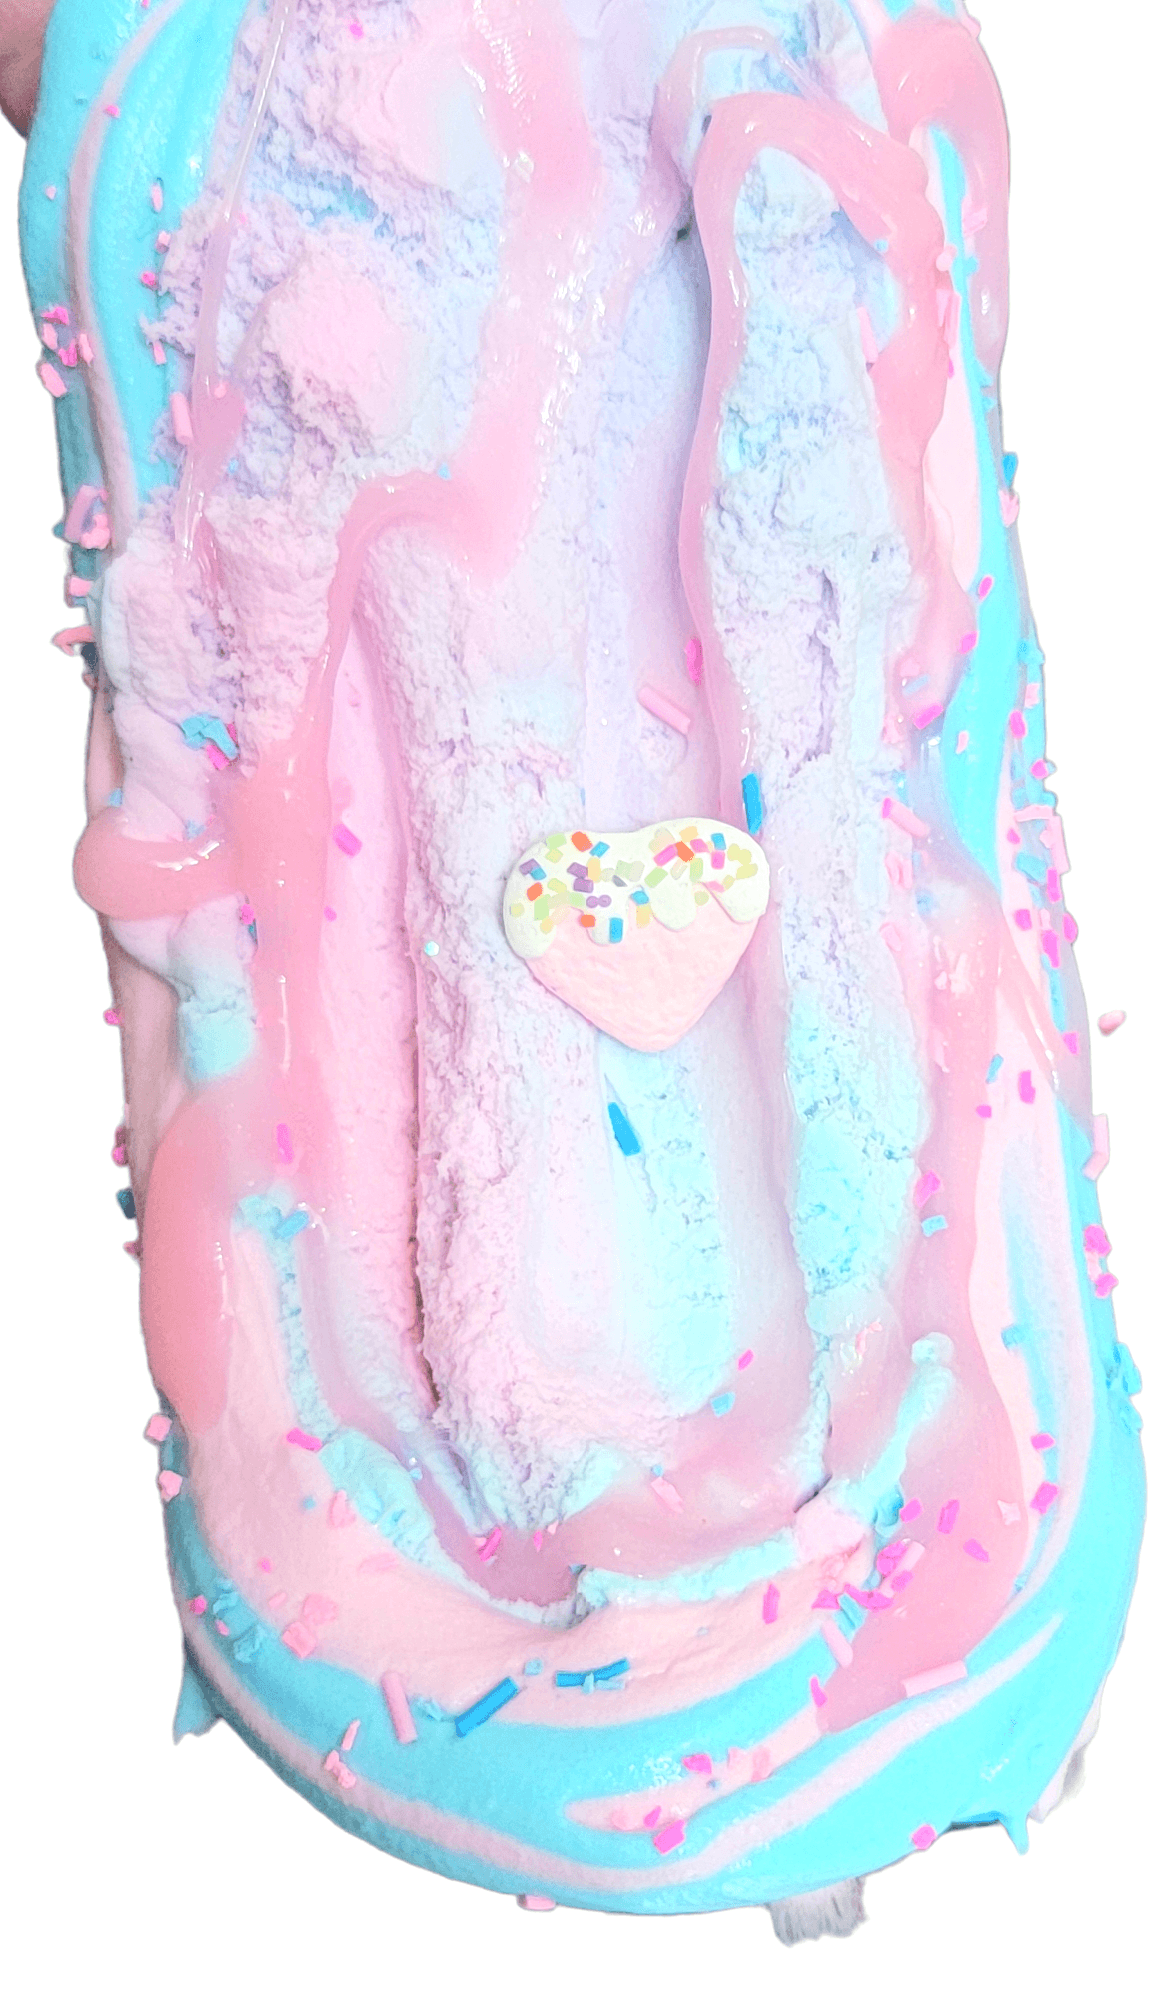 Cotton Candy Ice cream Scoops DIY Slime Kit Slime by Hoshimi Slimes LLC | Hoshimi Slimes LLC